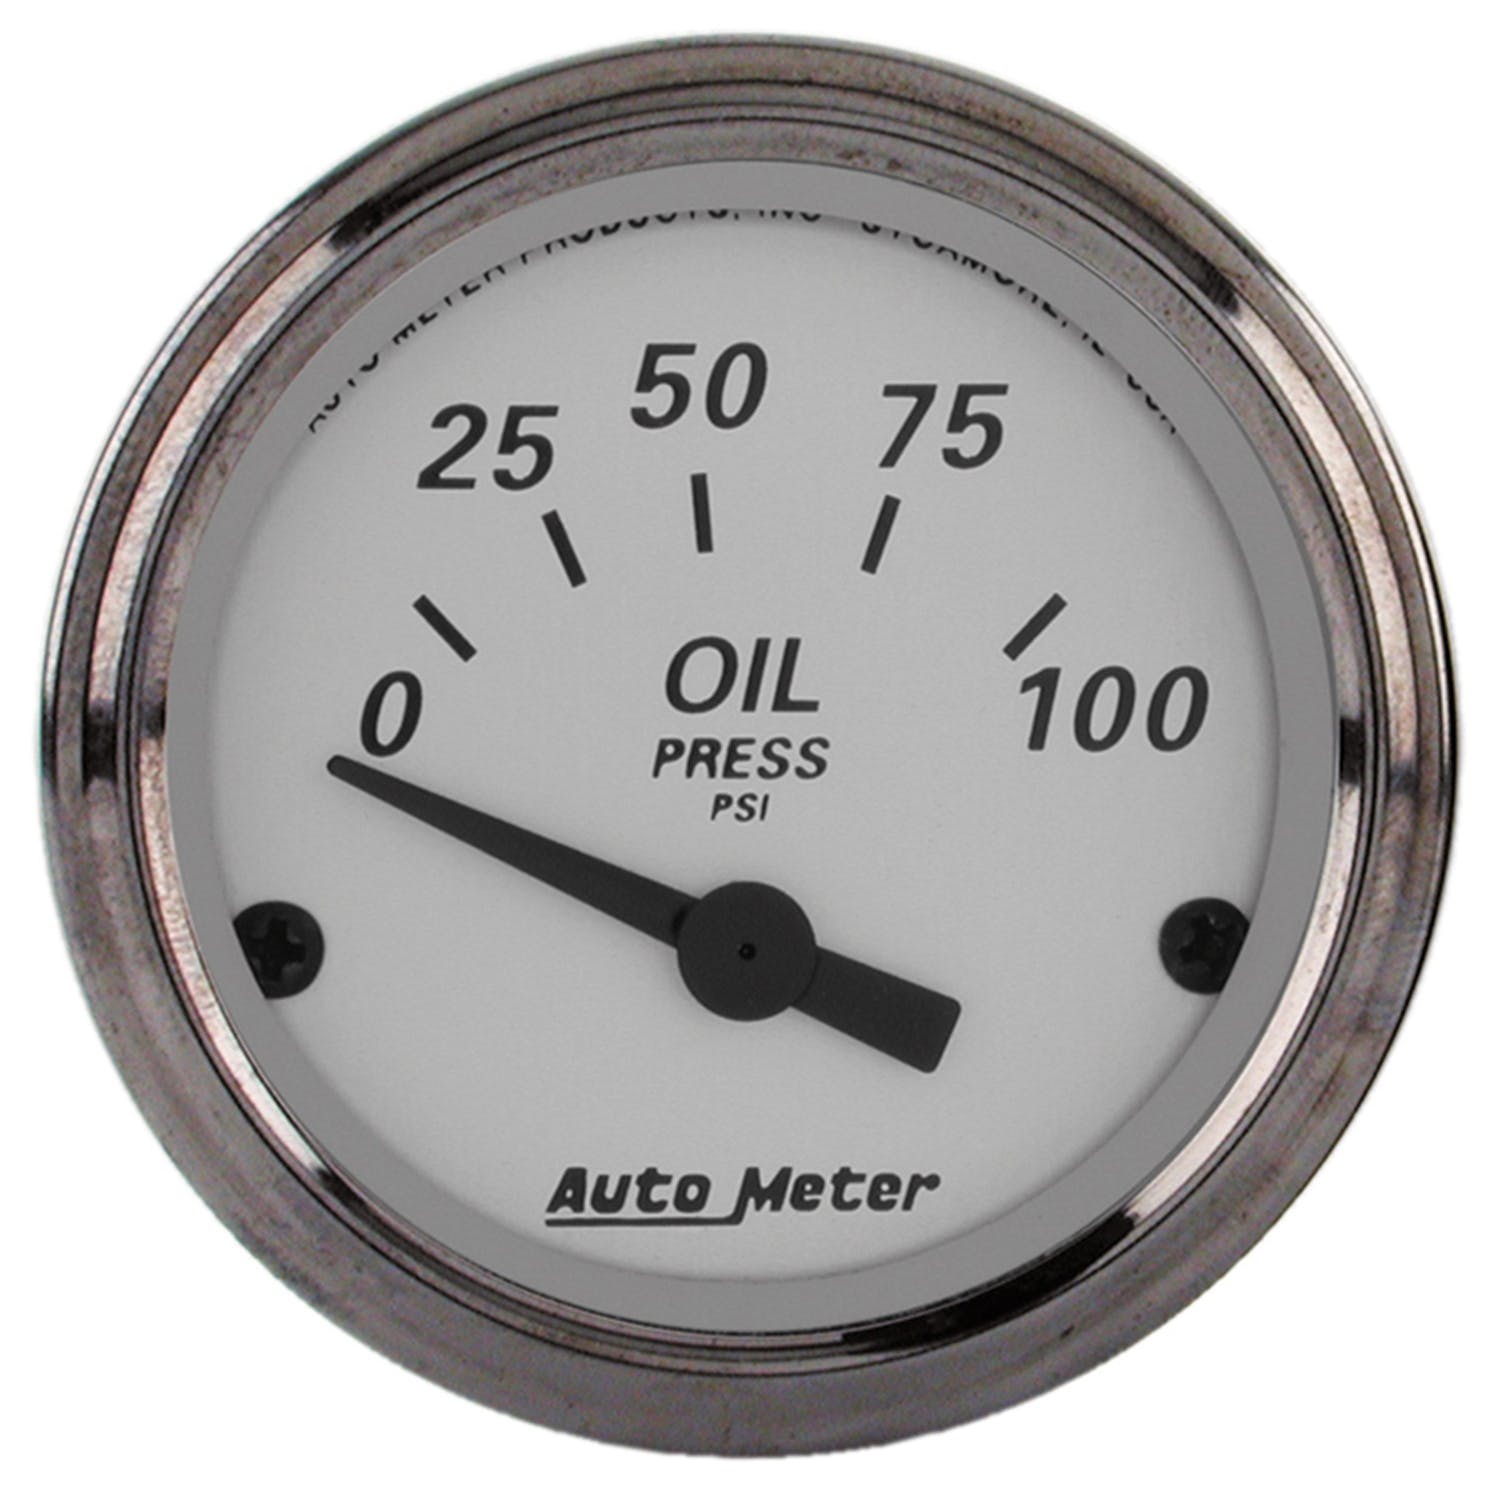 AutoMeter Products 1928 Oil Pressure Gauge 0-100 PSI